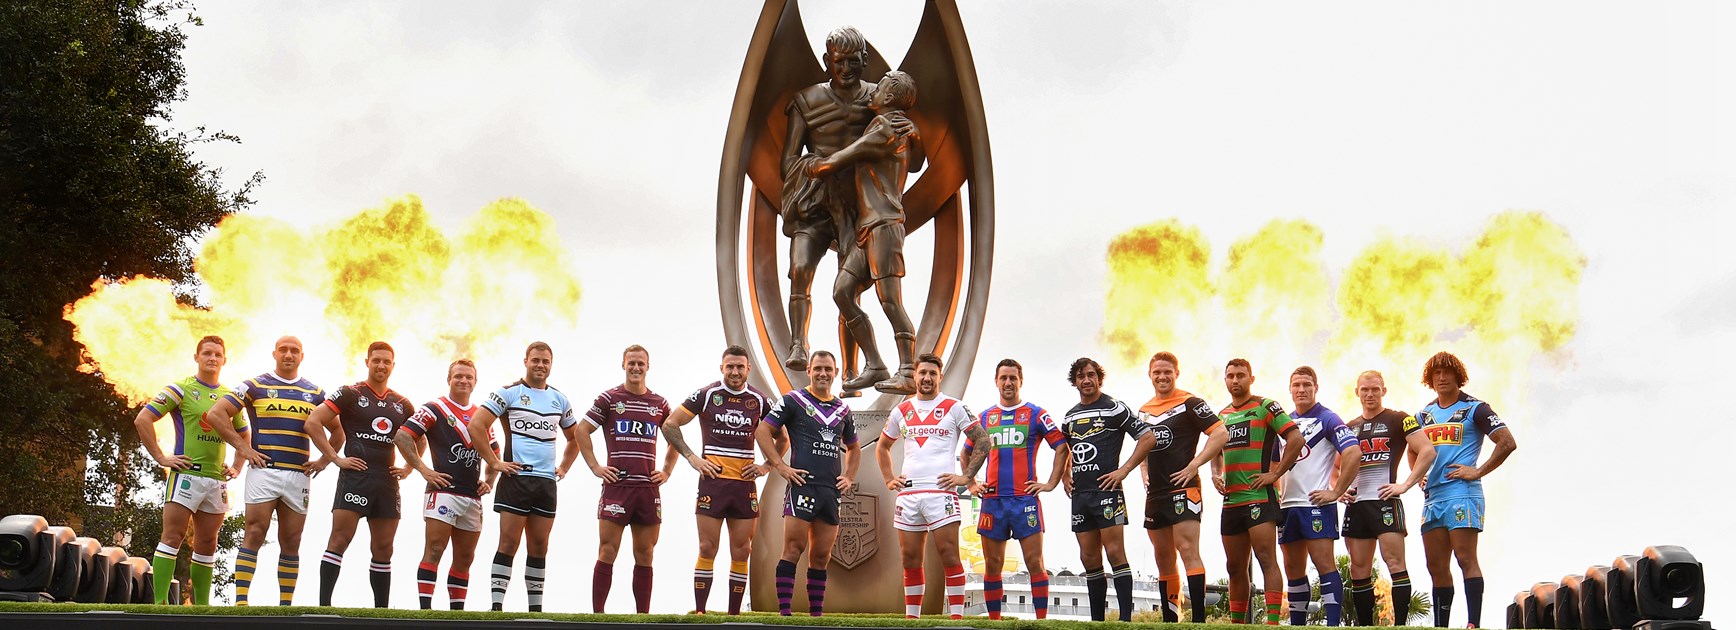 Representatives of all 16 clubs at the 2018 NRL season launch.
